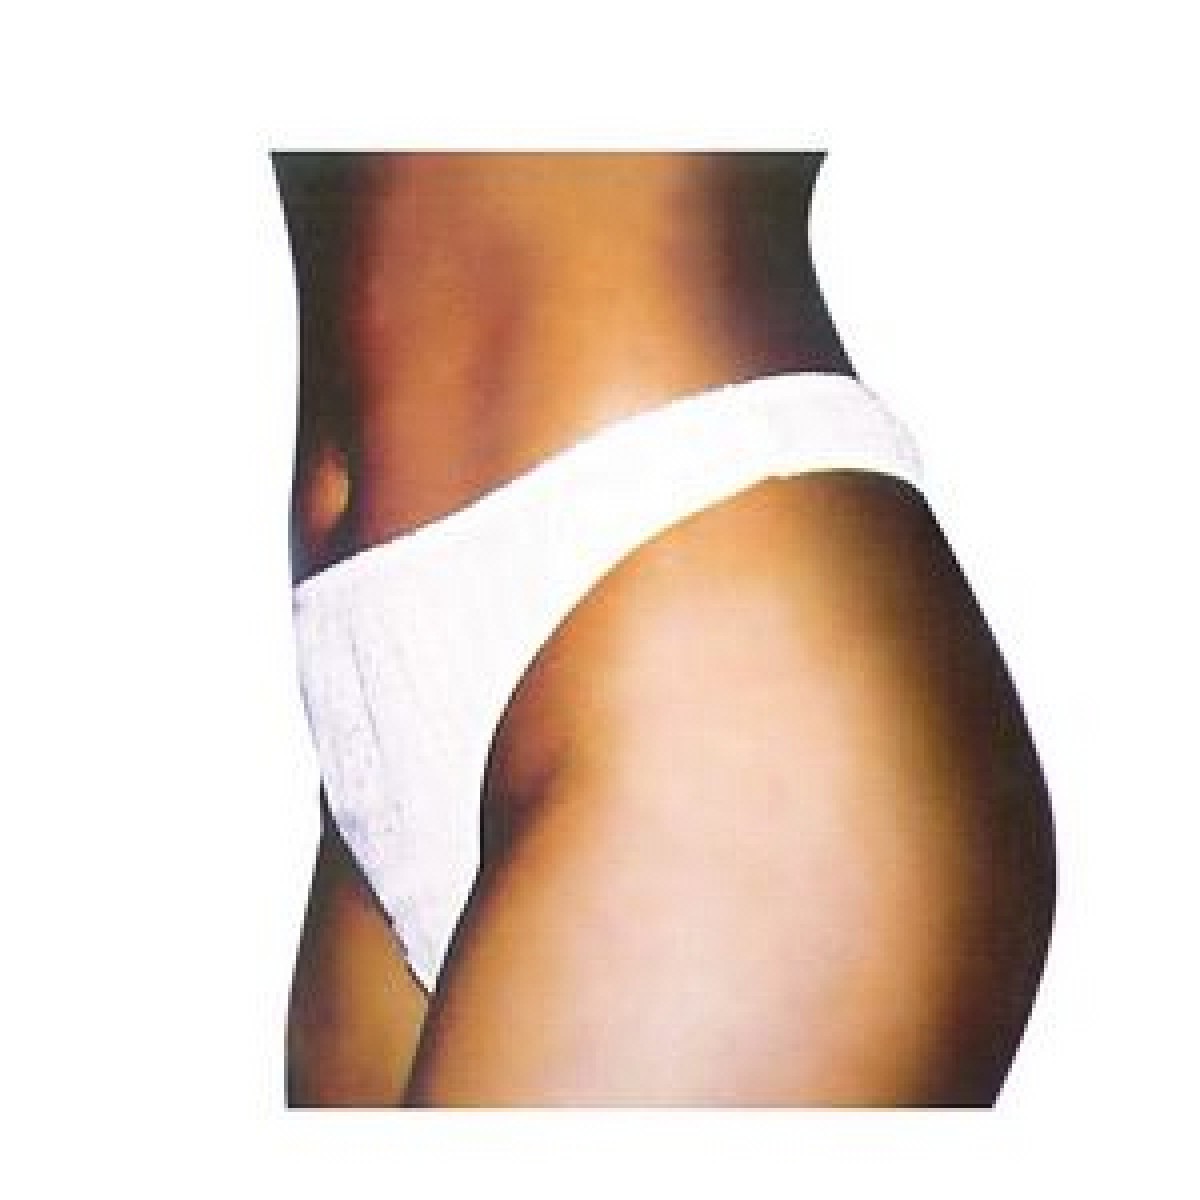 Calzoncillos desechables, Talla M (7 uds.) -